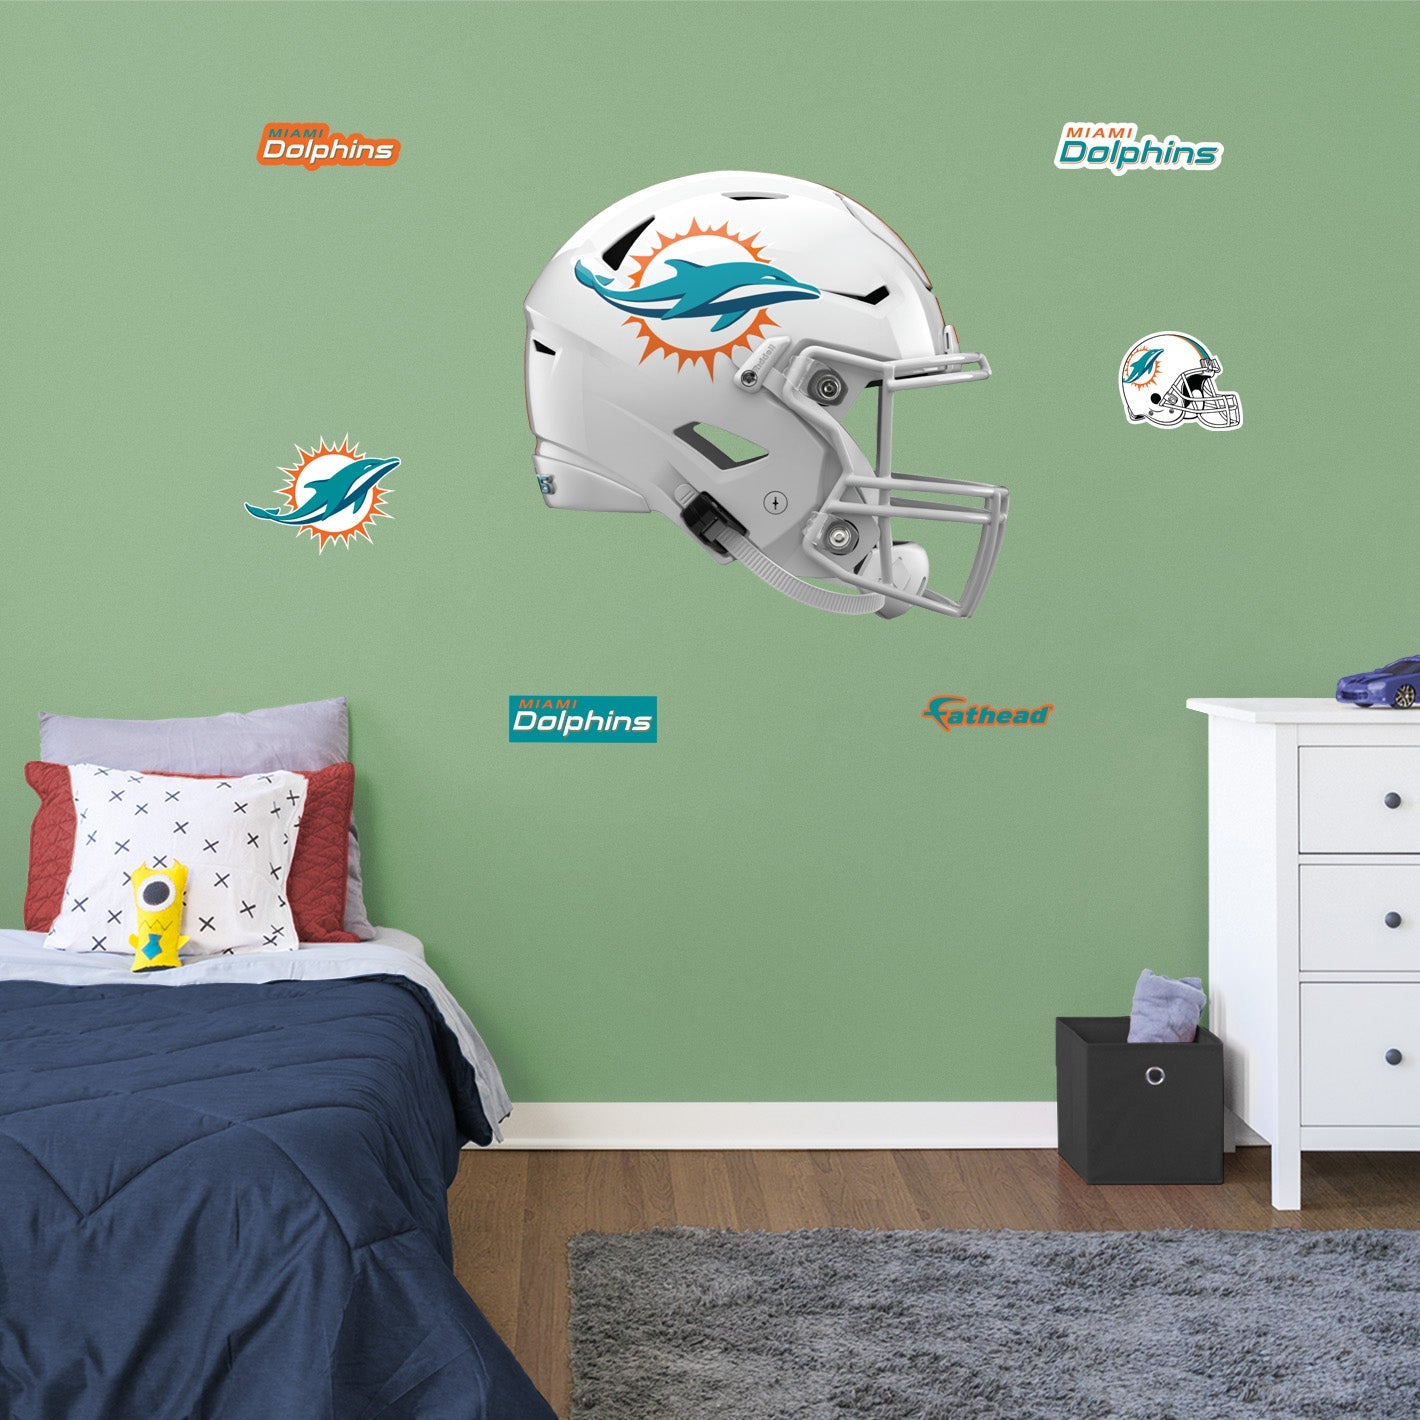 Miami Dolphins: Helmet - Officially Licensed NFL Removable Adhesive Decal